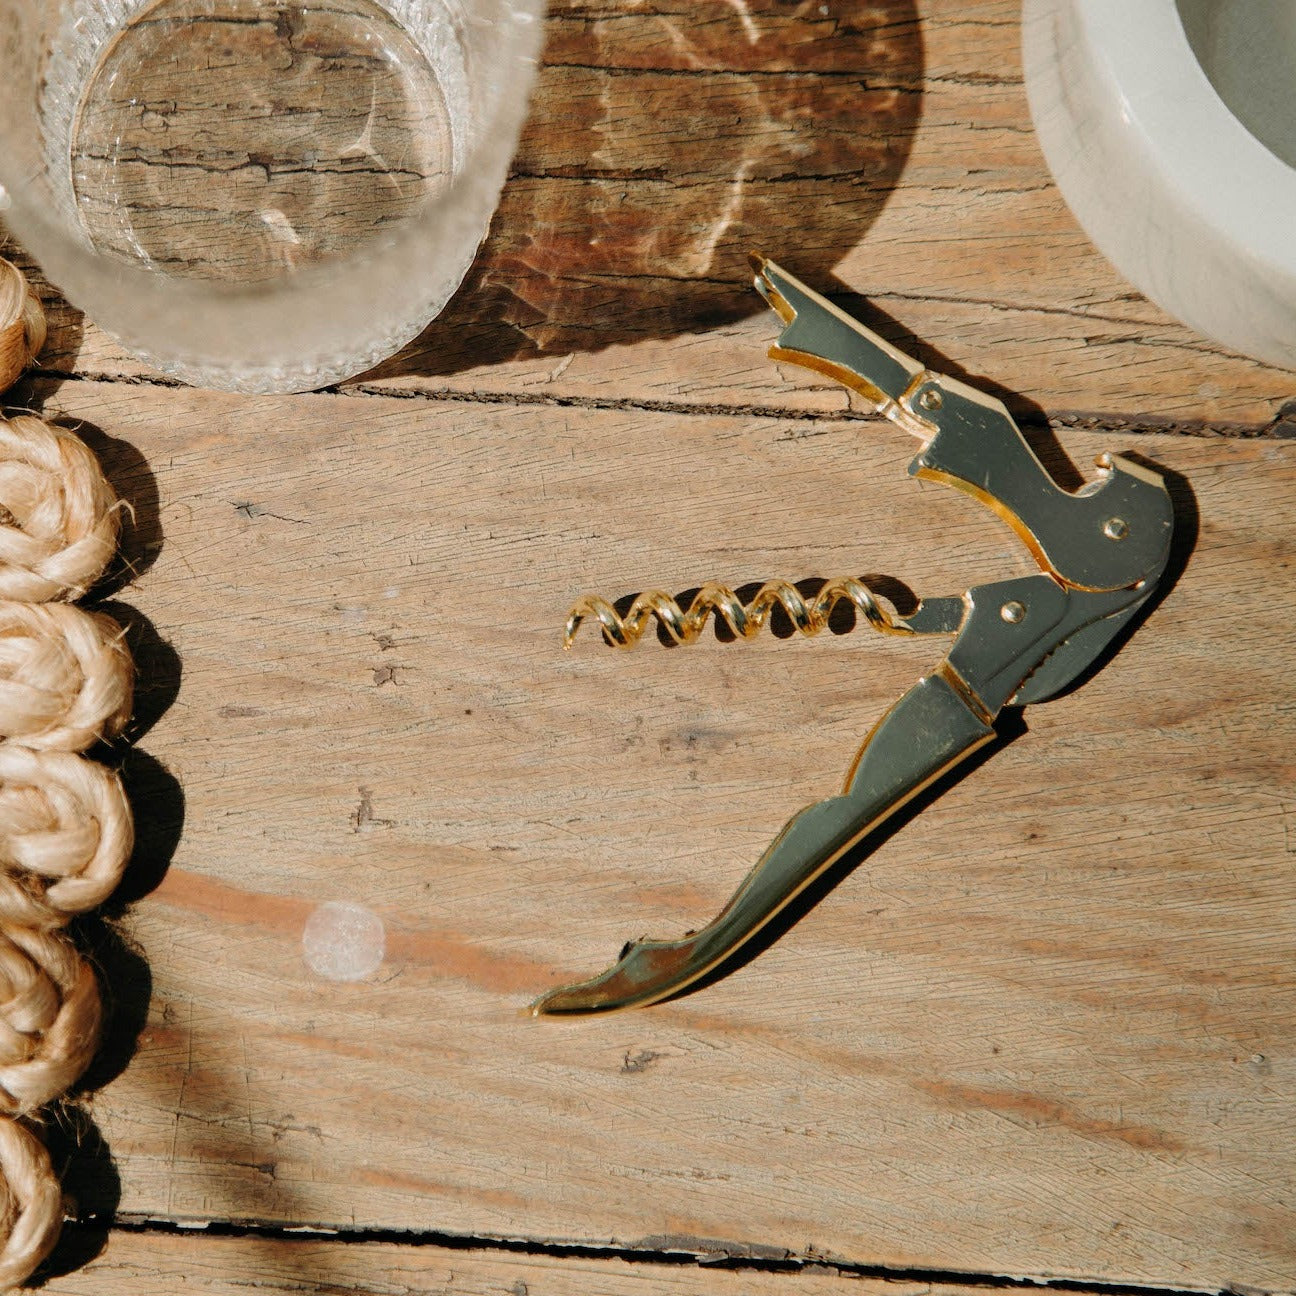 A gold Mielle wine opener laying on a wooden table next to a clear glass of water.